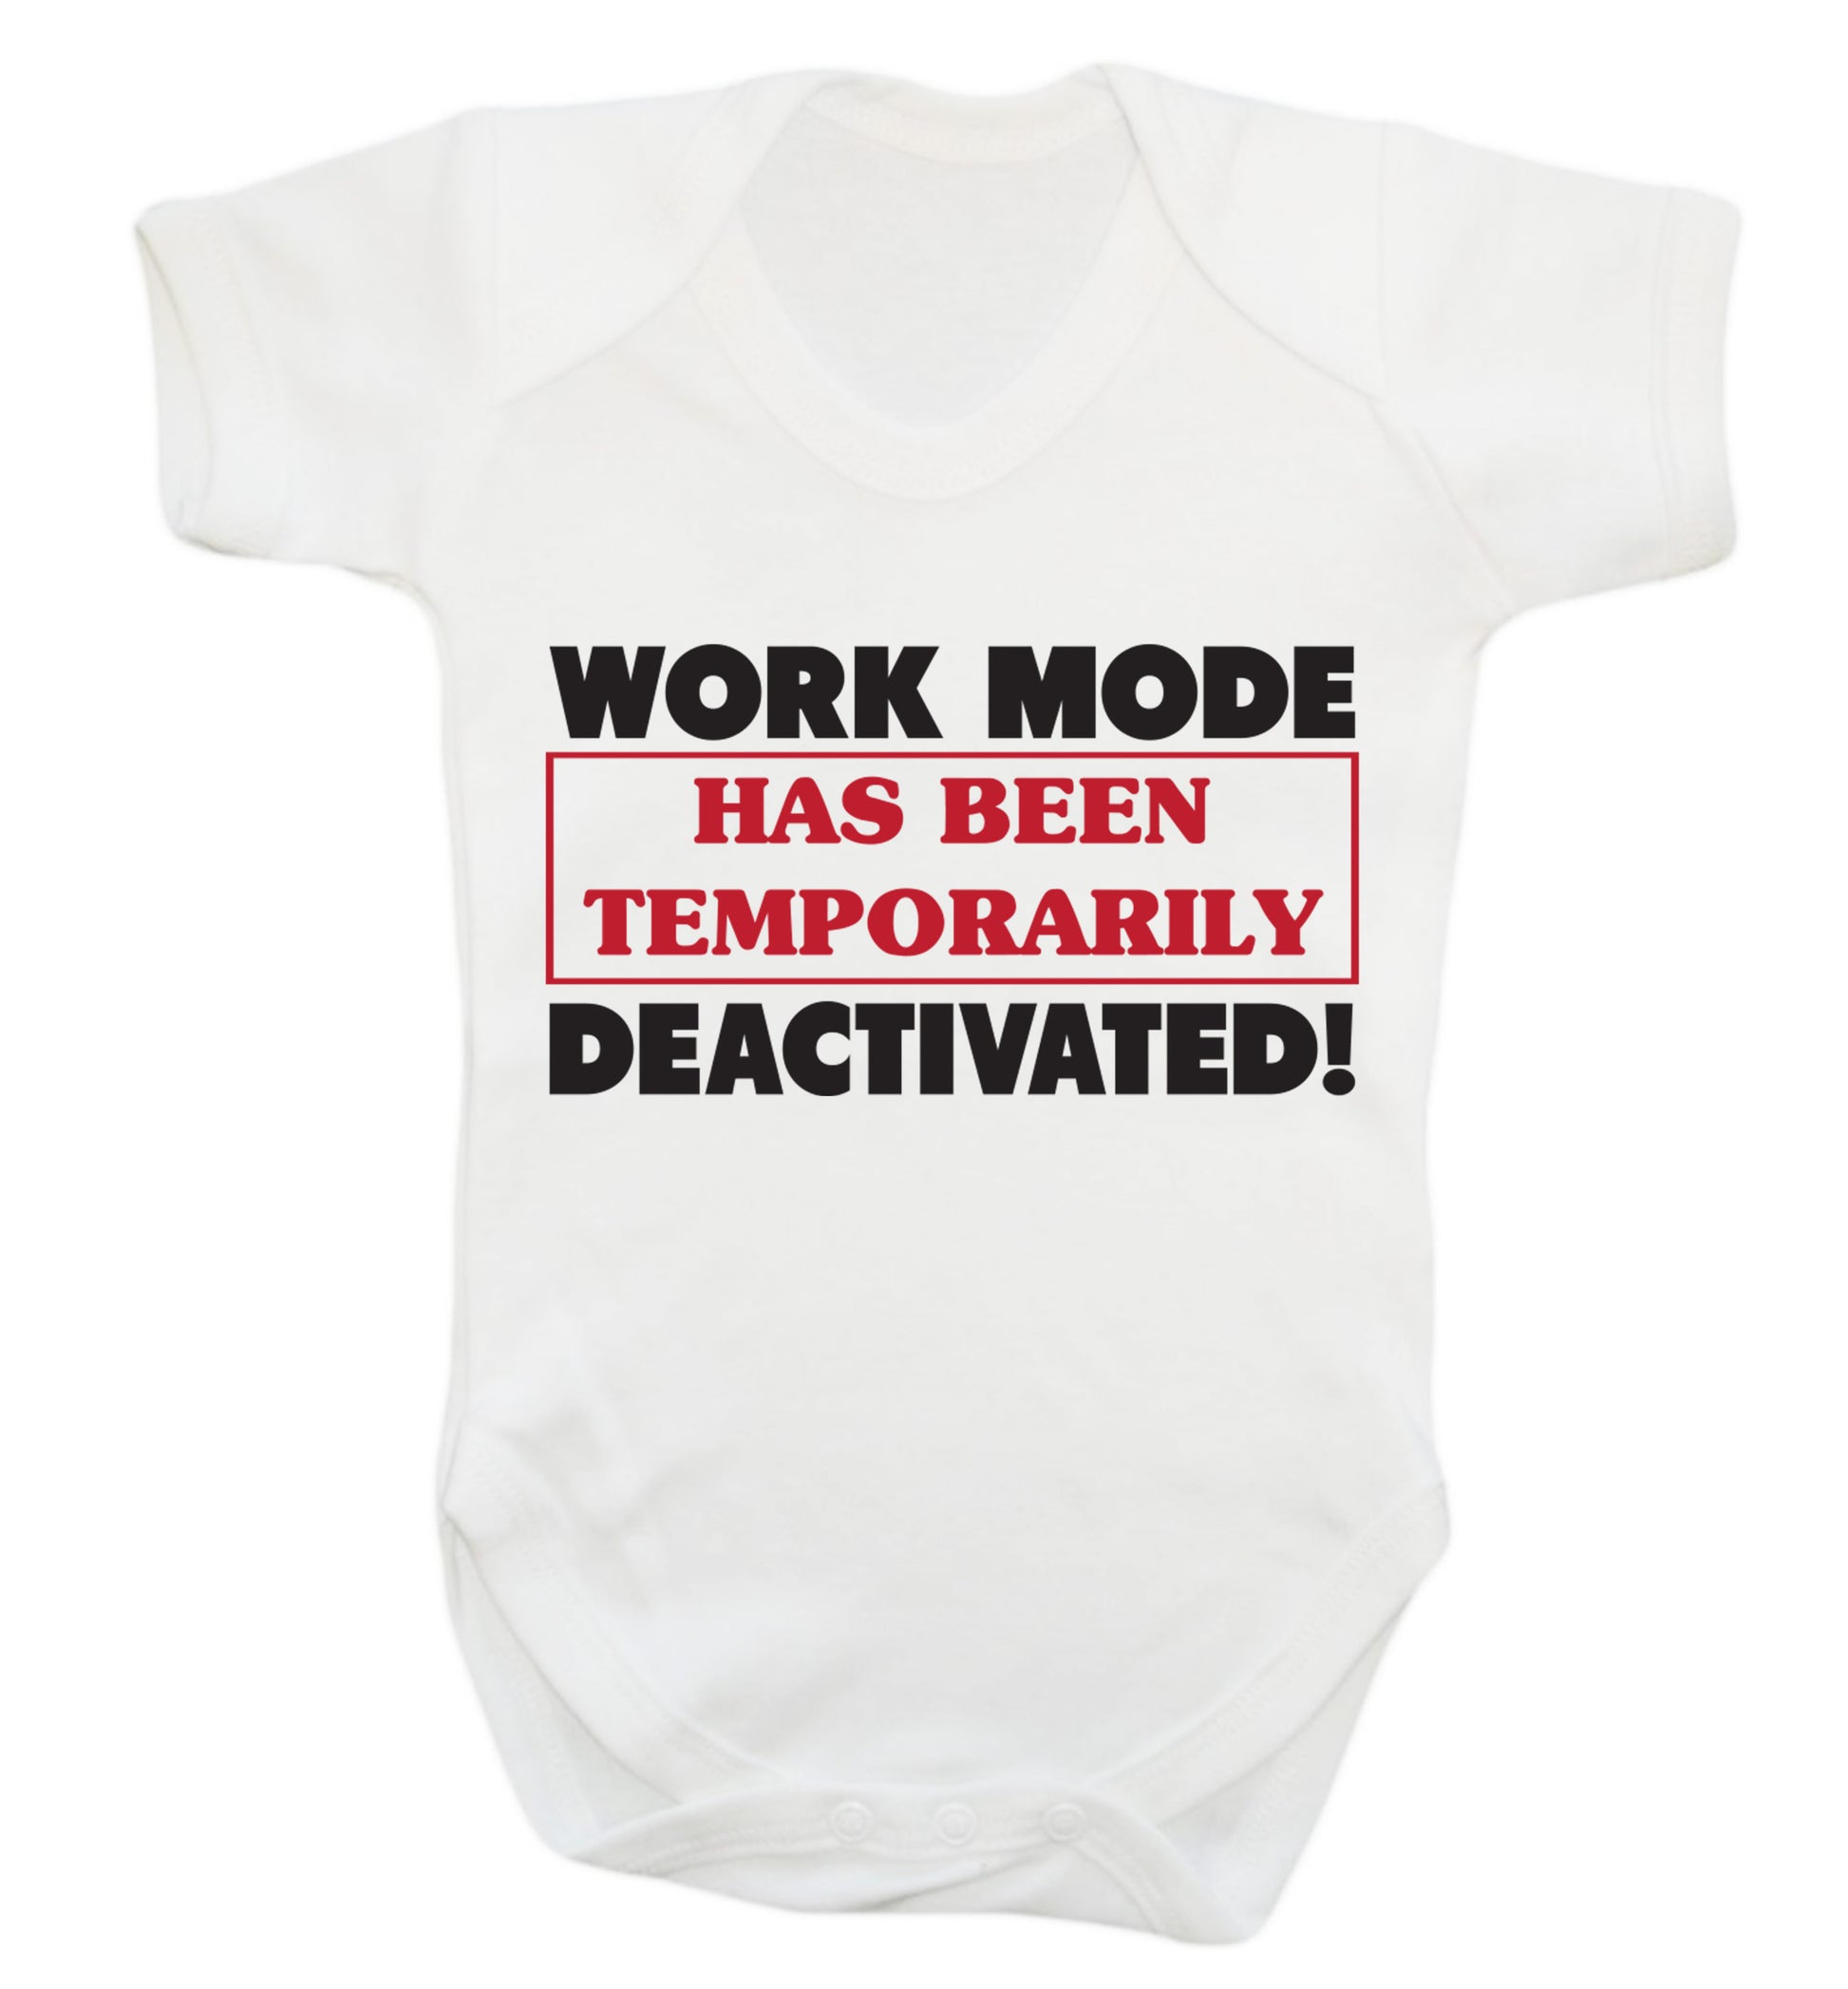 Work mode has now been temporarily deactivated Baby Vest white 18-24 months